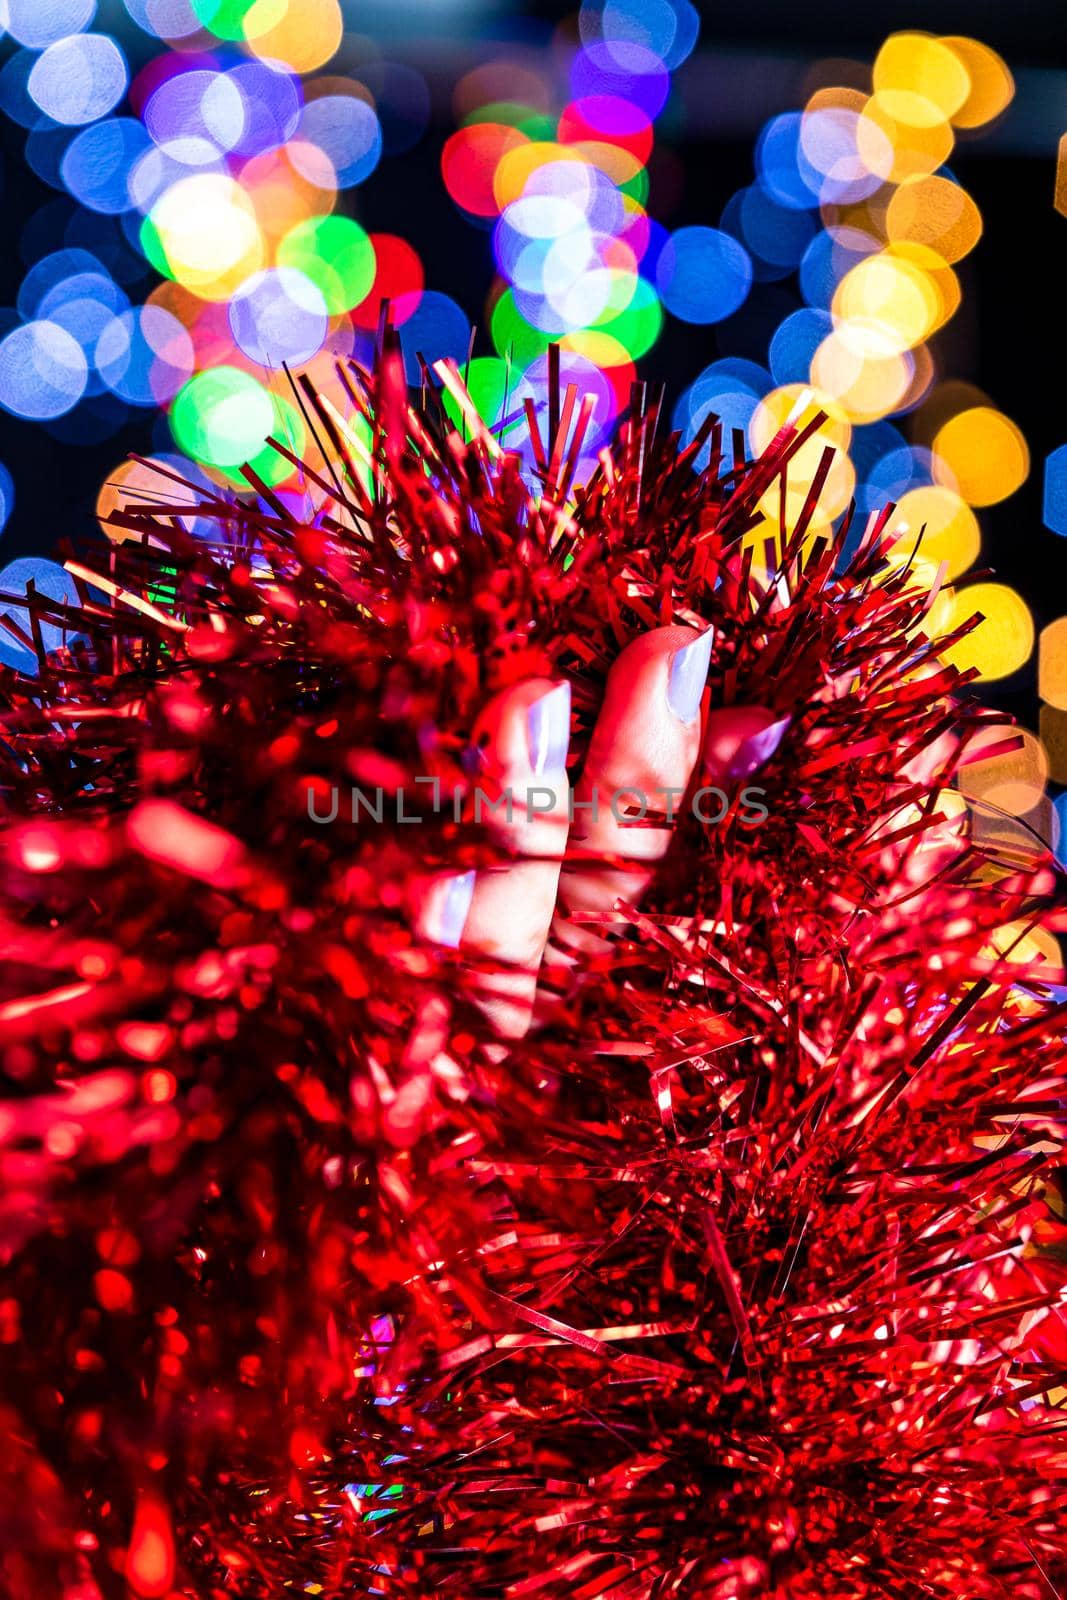 Holding Christmas garland decoration isolated on background with blurred lights. December season, Christmas composition.